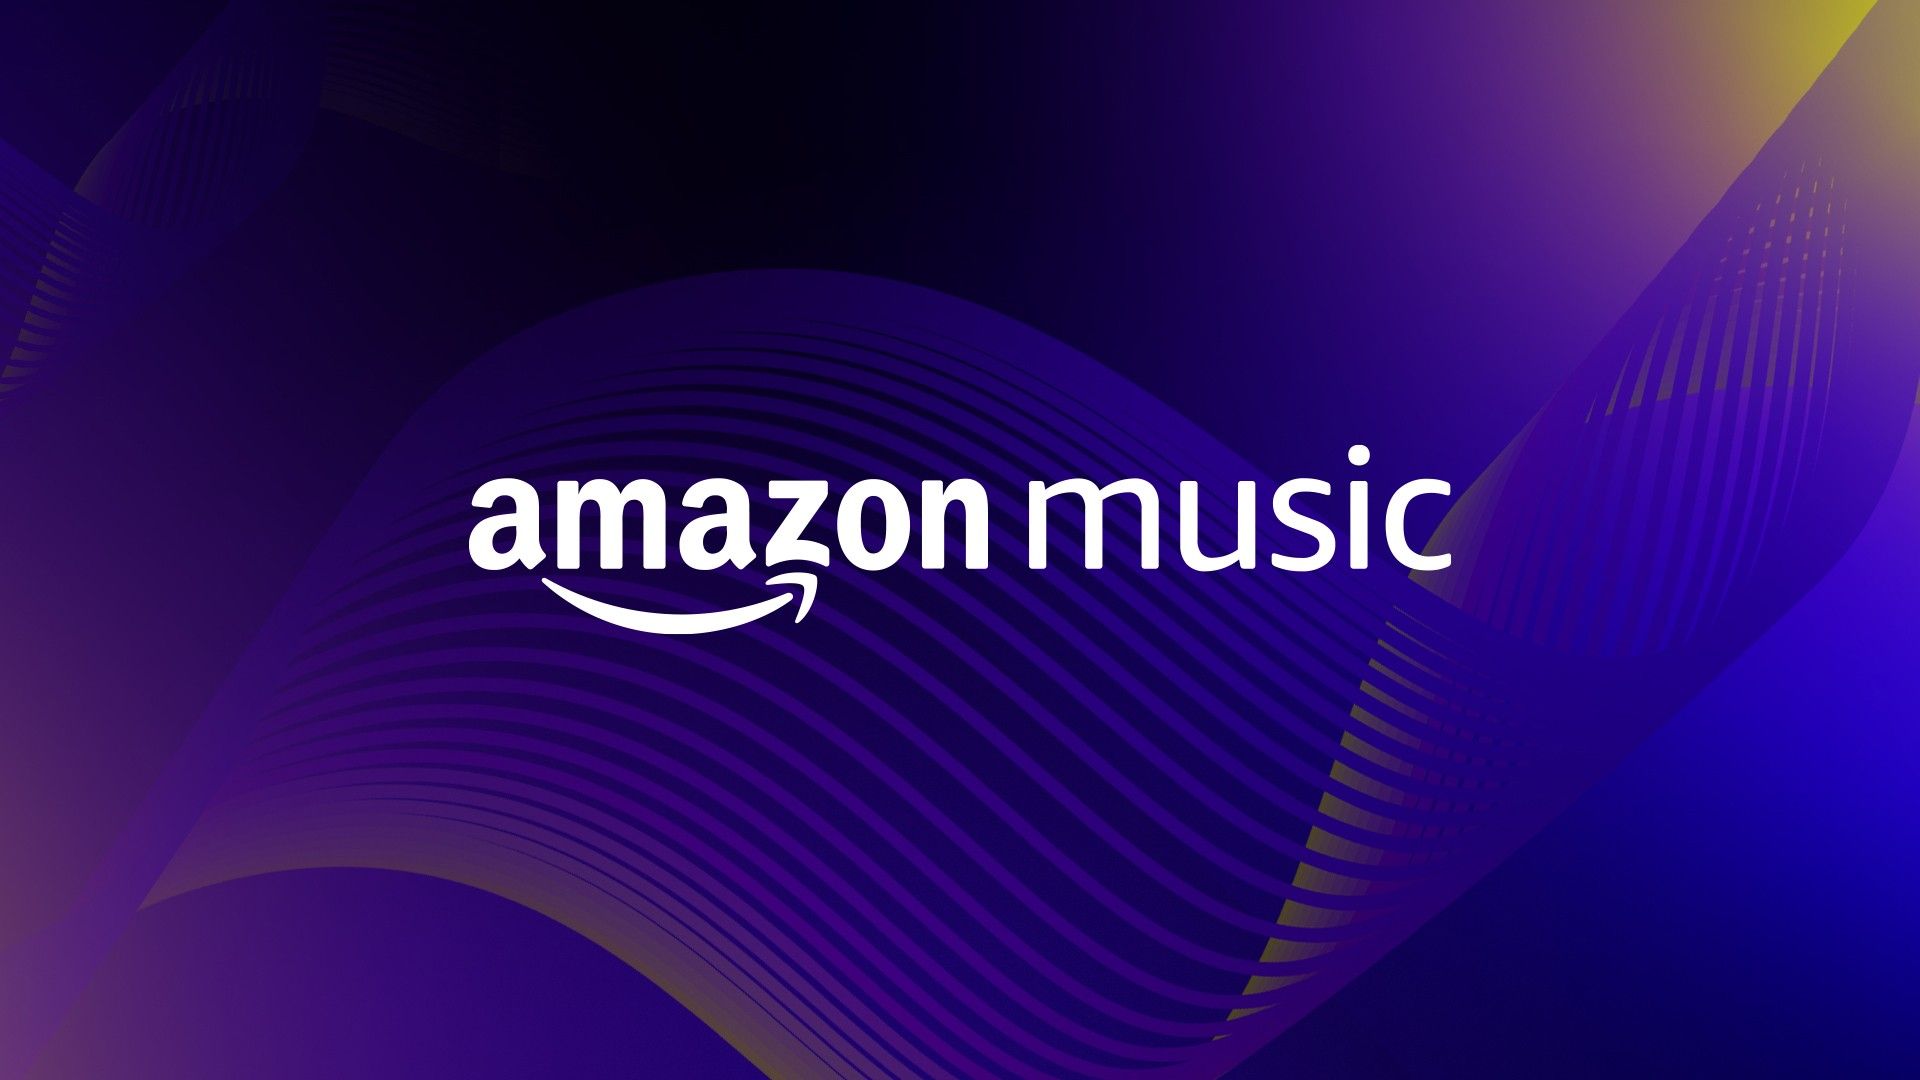 Amazon Prime Music to Stream 'Lossless HD Songs' to Take on Apple Music,  Spotify - News18